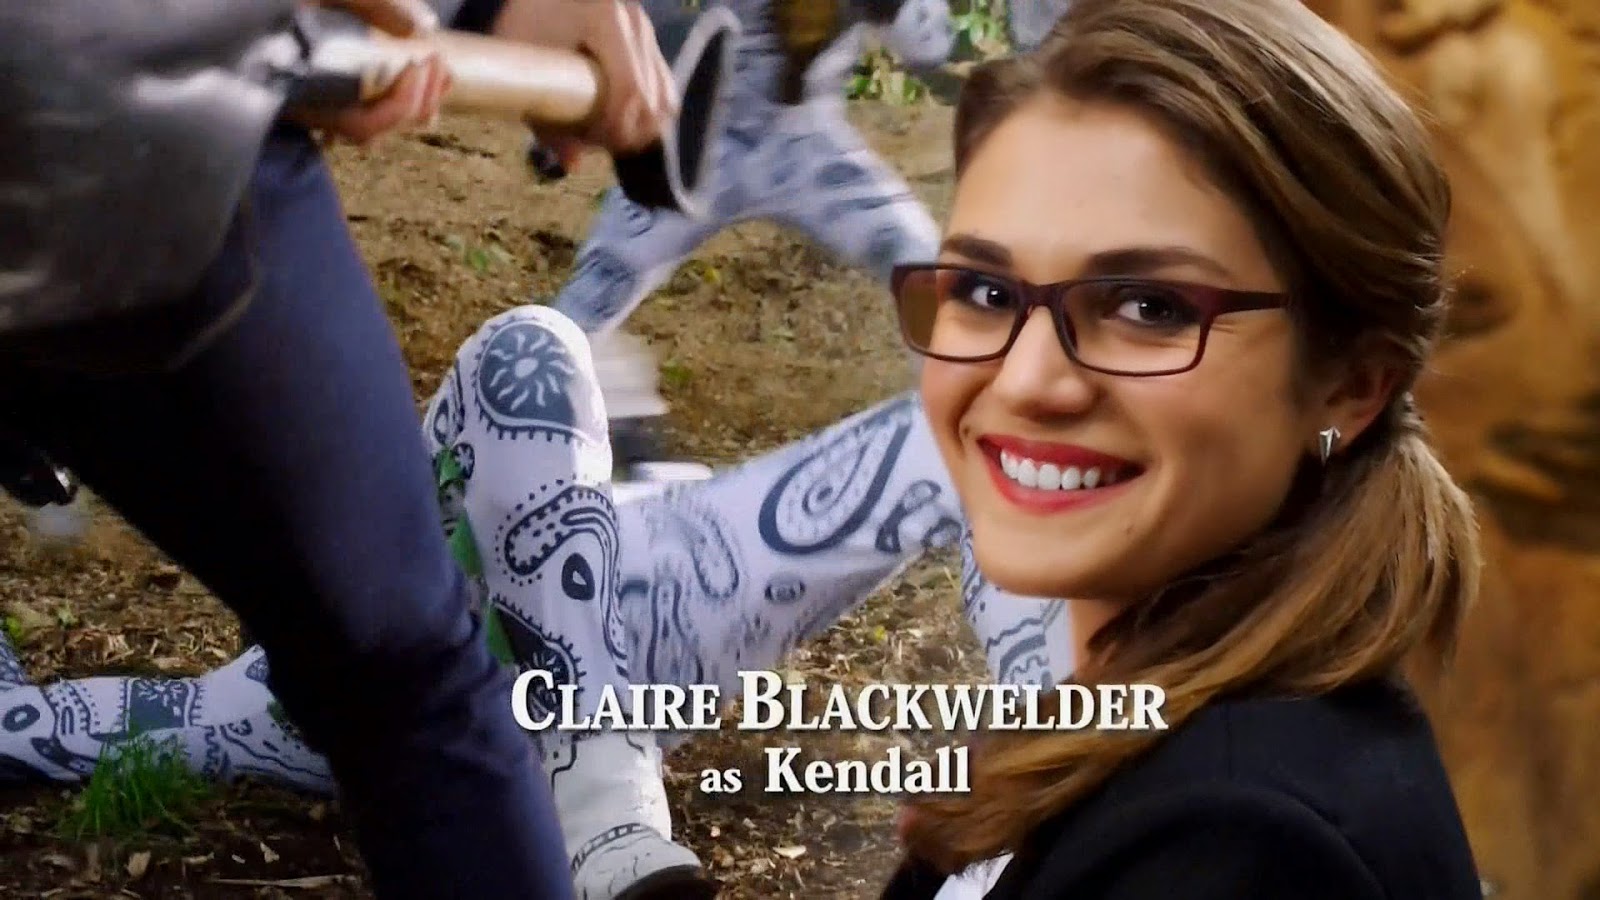 Claire Blackwelder was suspected to be the Purple Ranger since she was cast...